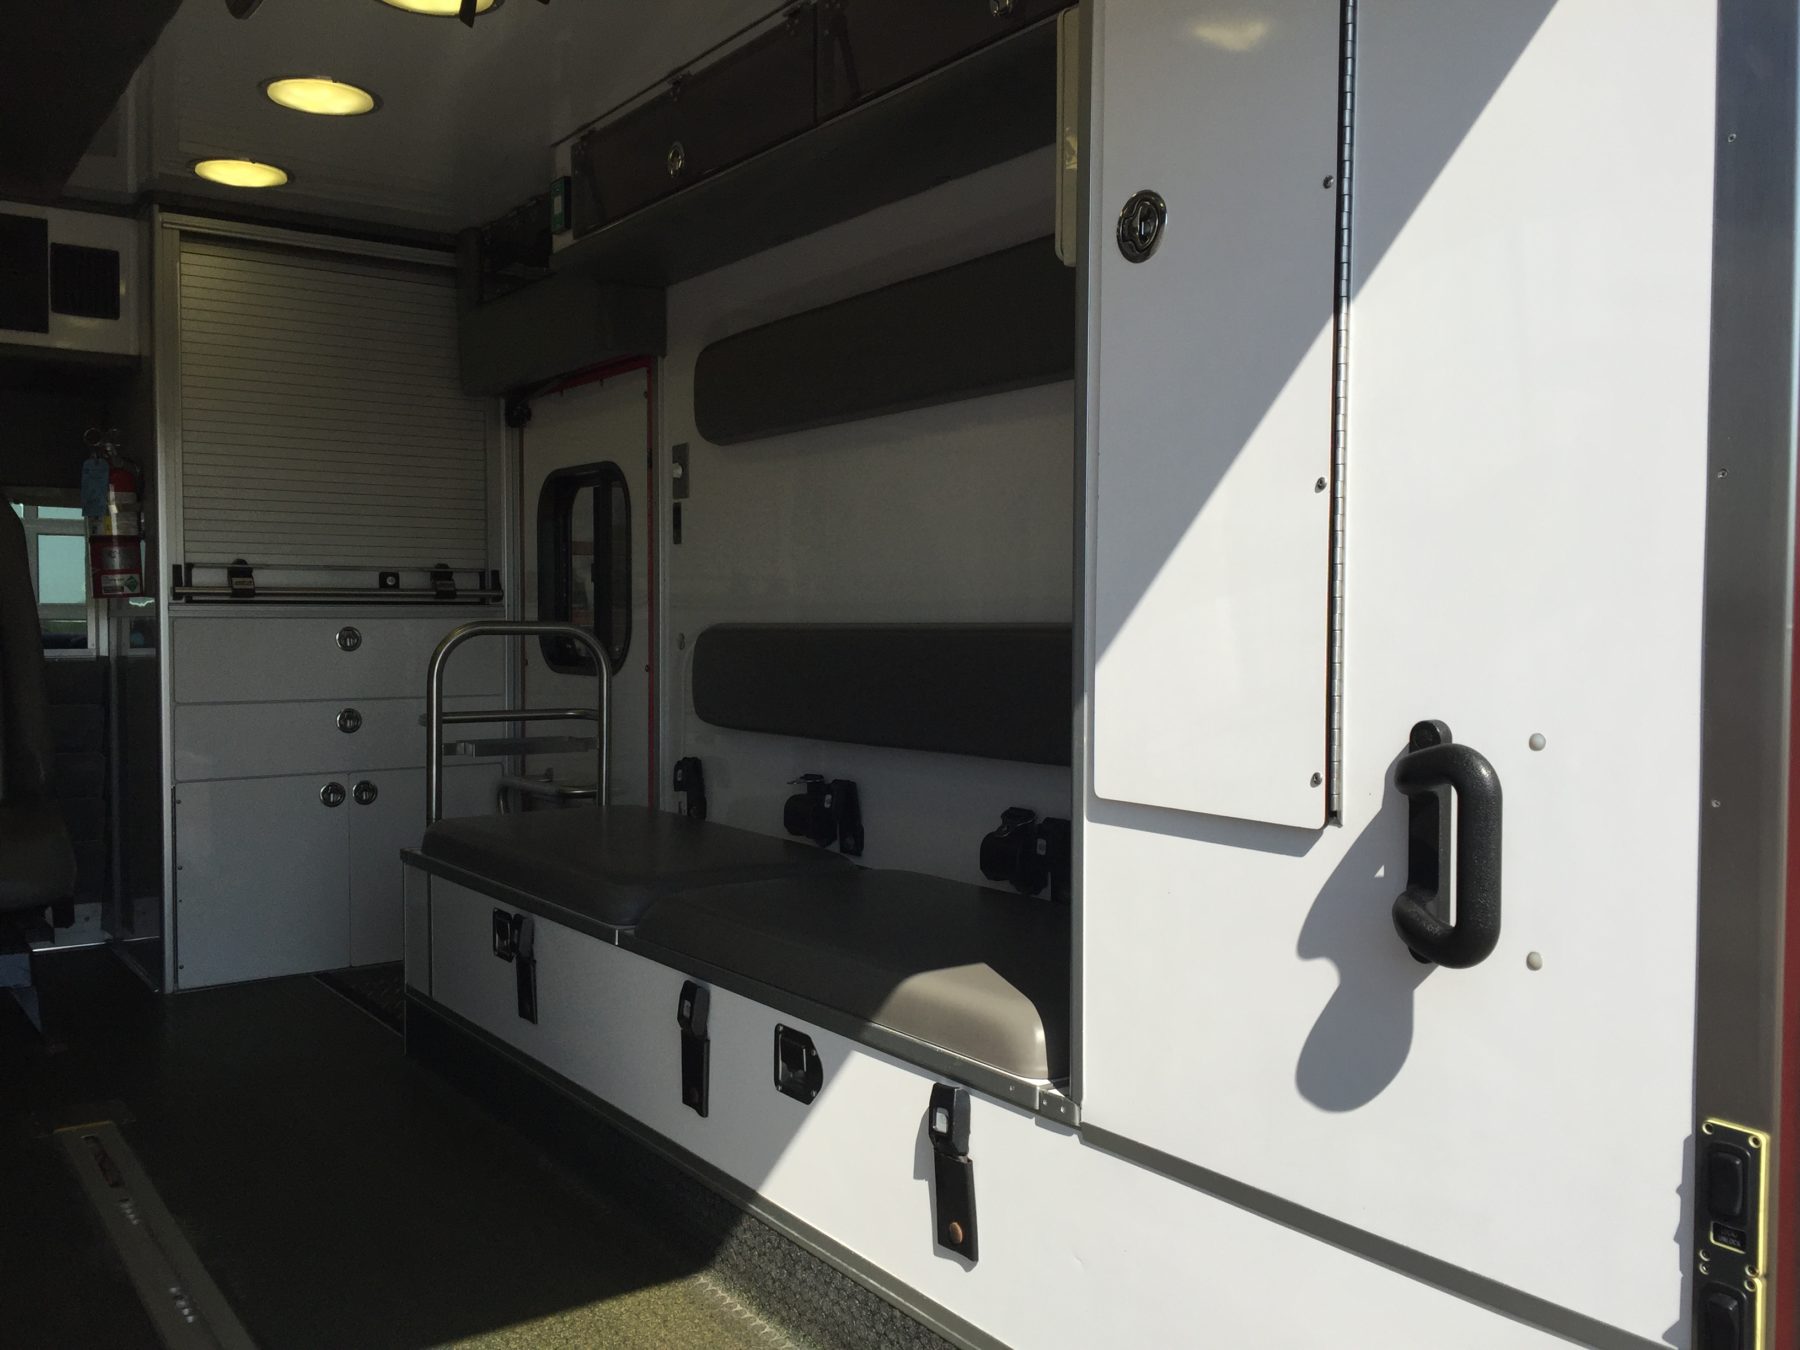 2009 Chevrolet C4500 Heavy Duty Ambulance For Sale – Picture 12